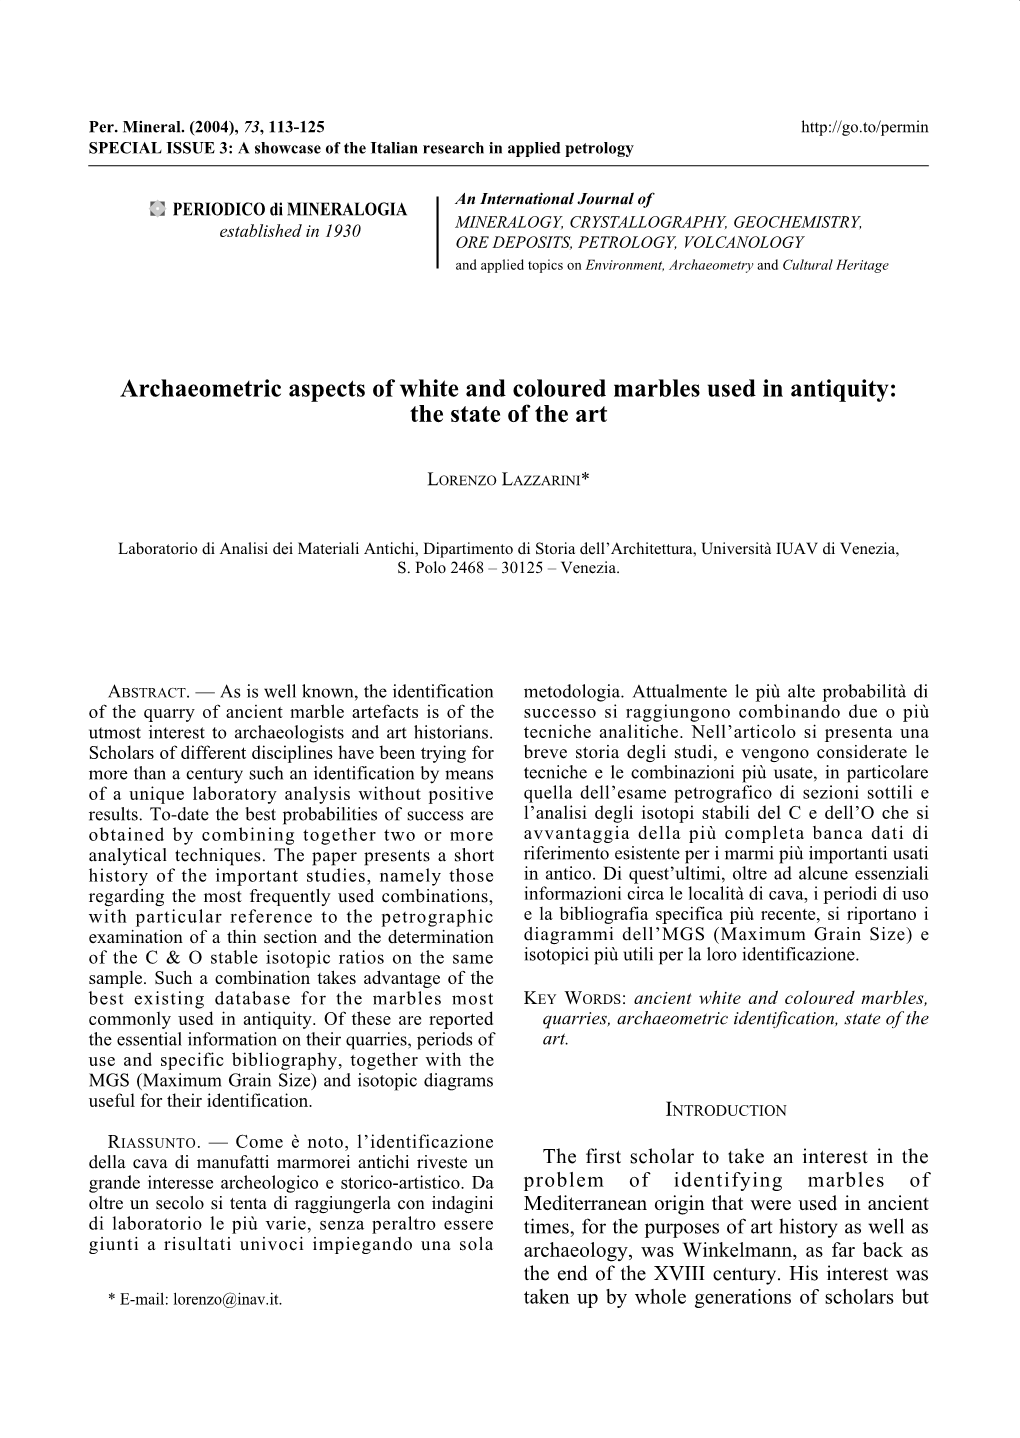 Archaeometric Aspects of White and Coloured Marbles Used in Antiquity: the State of the Art